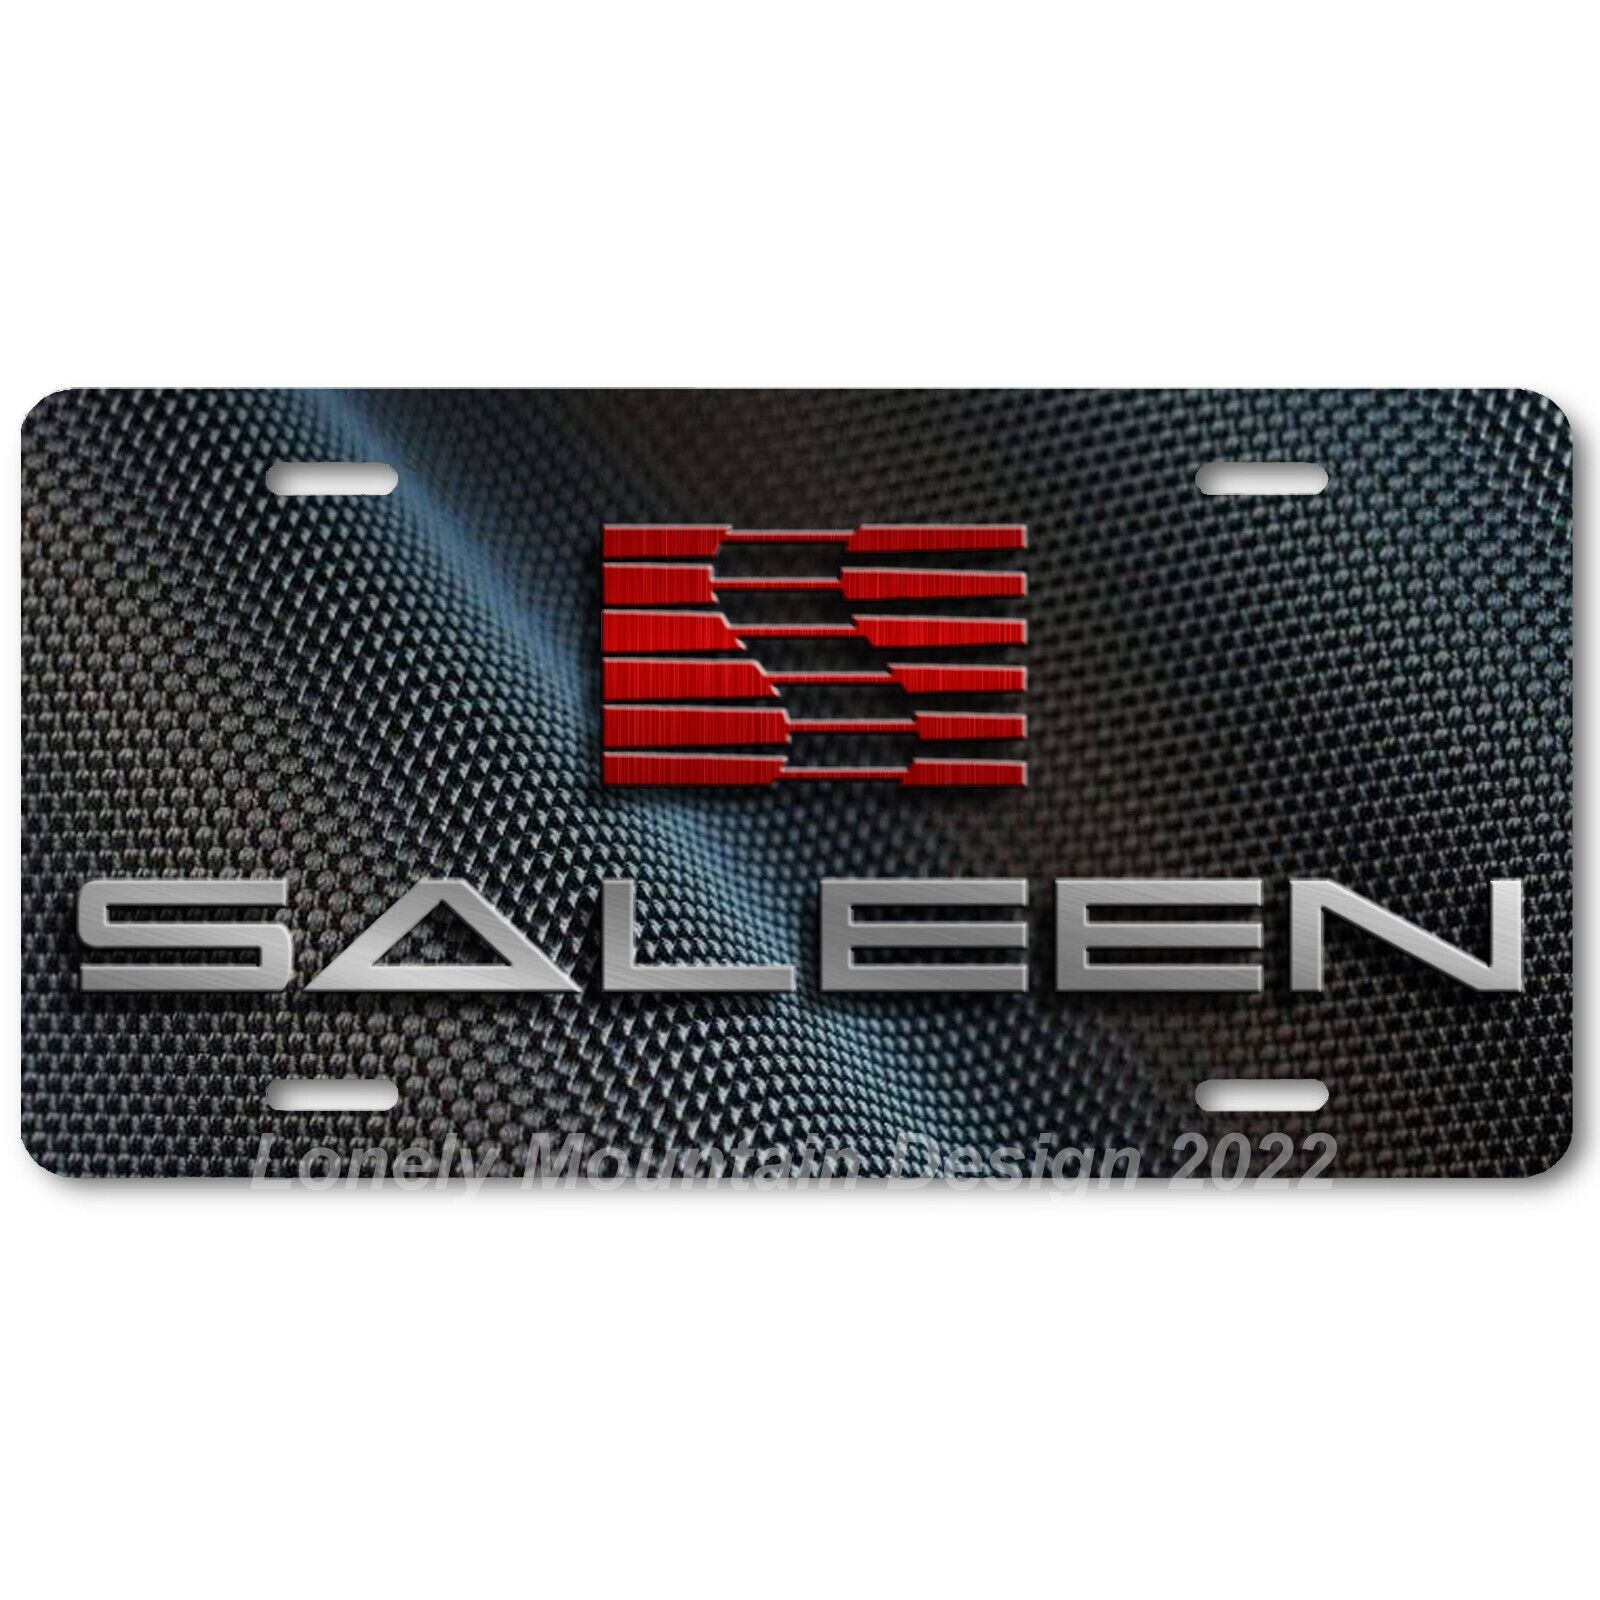 Ford Mustang Saleen Inspired Art on Carbon FLAT Aluminum Novelty License Plate